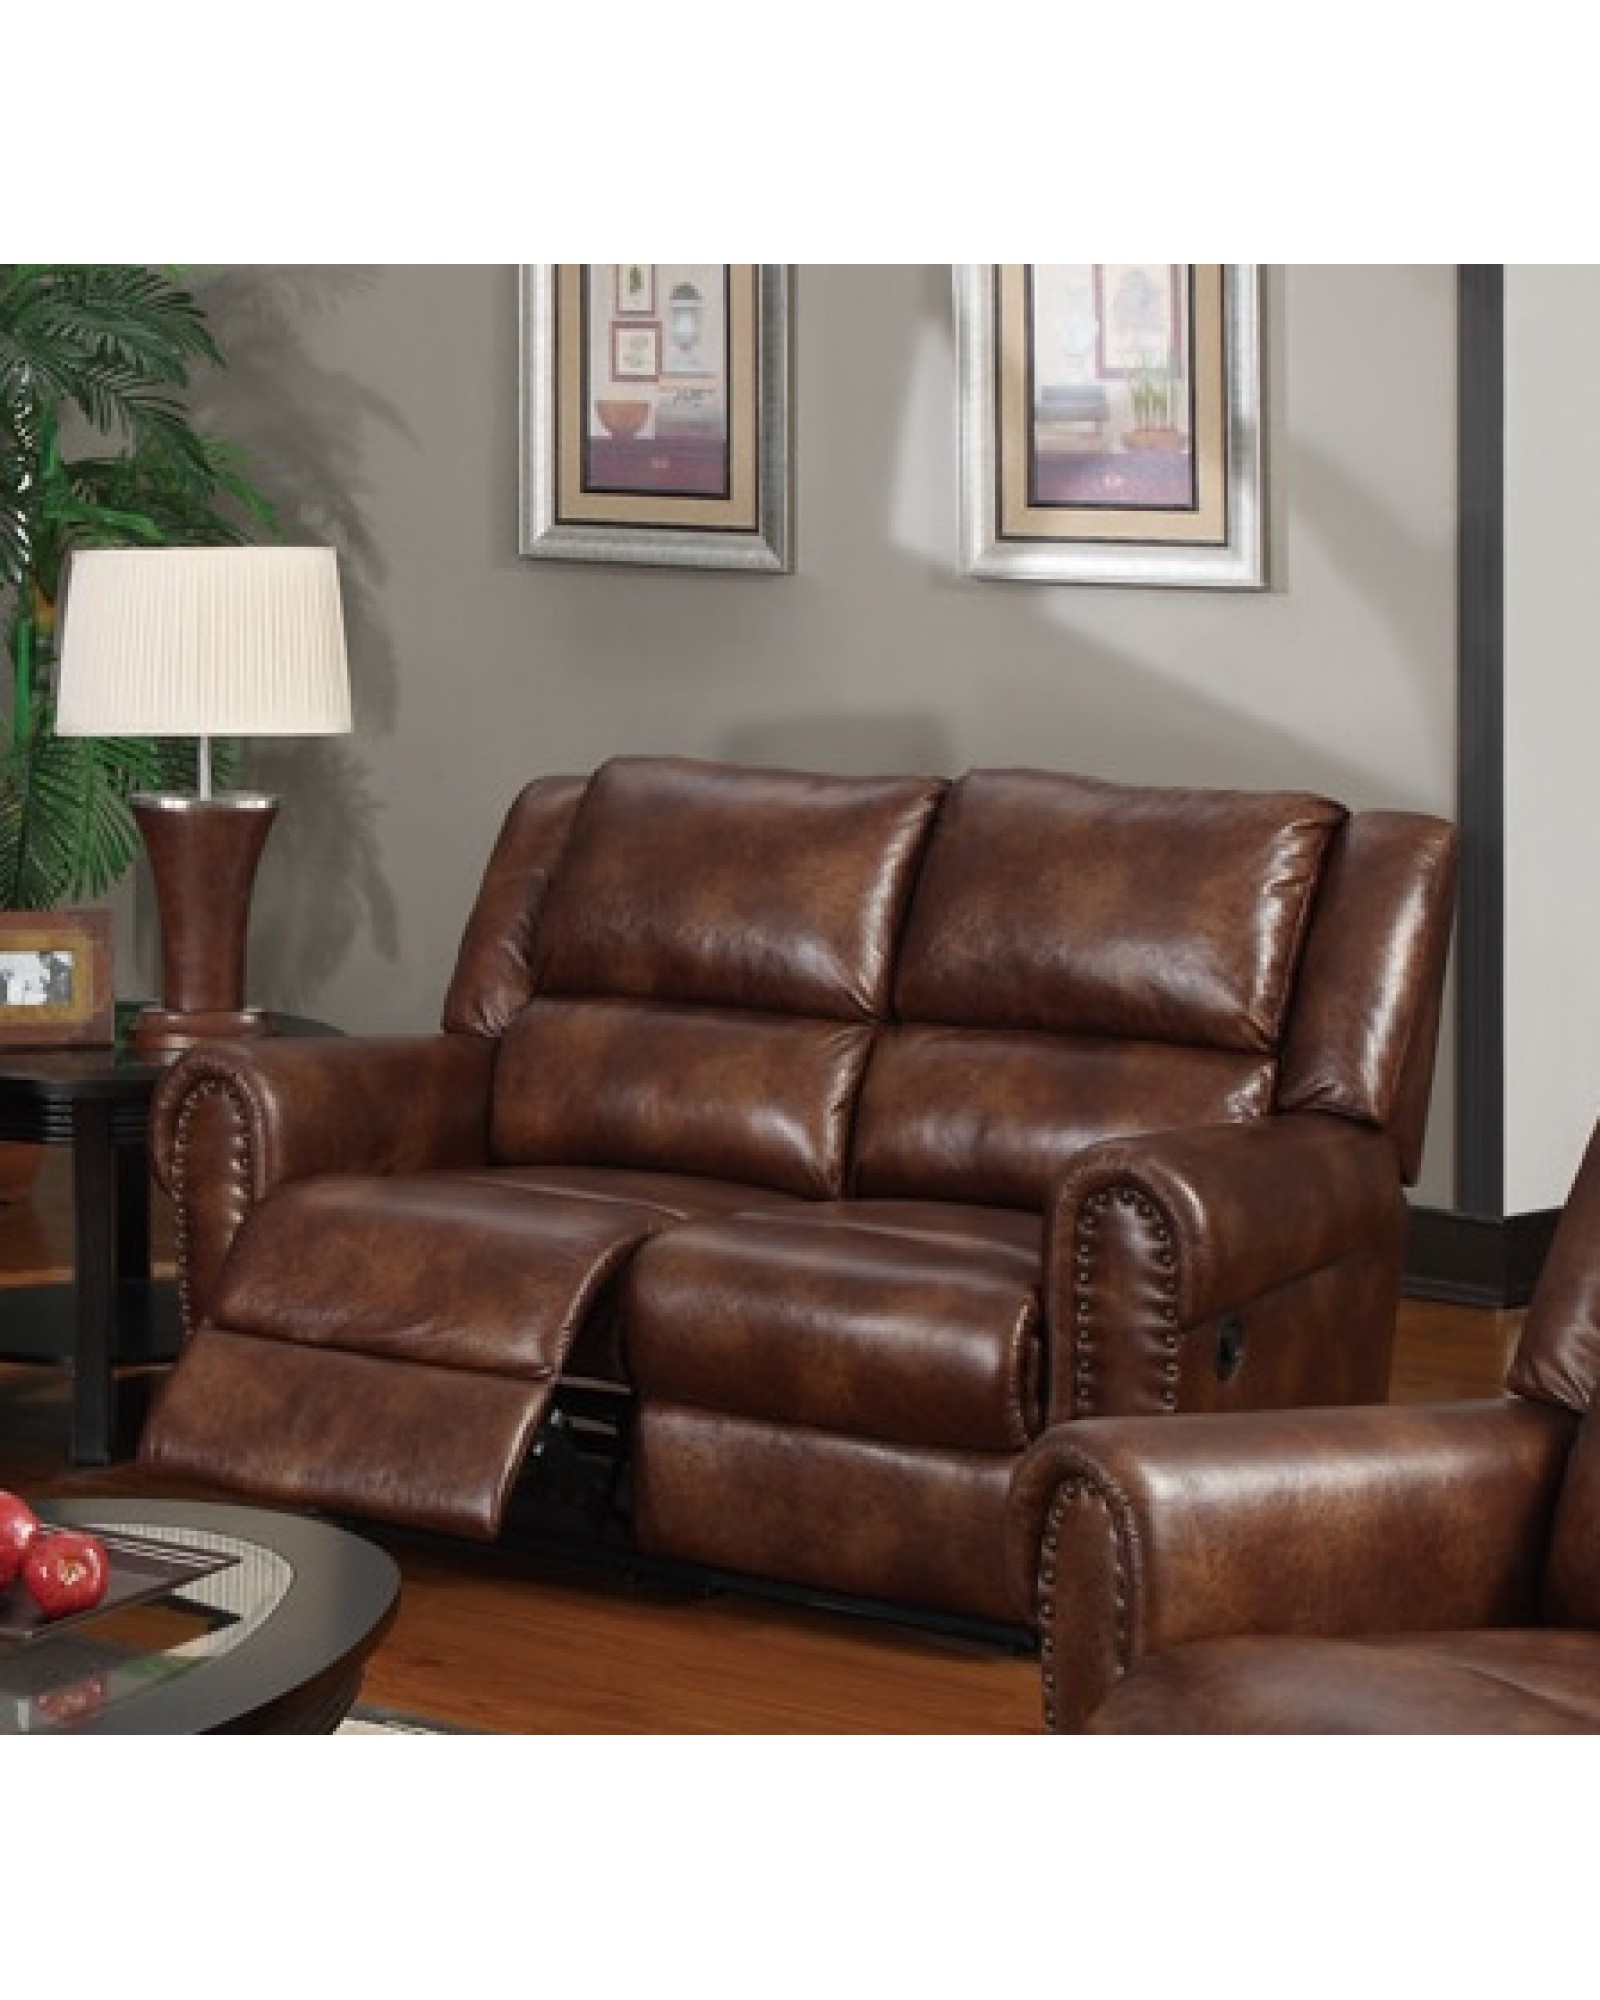 Padded Leatherette Motion Sofa, Loveseat and Recliner, Brown